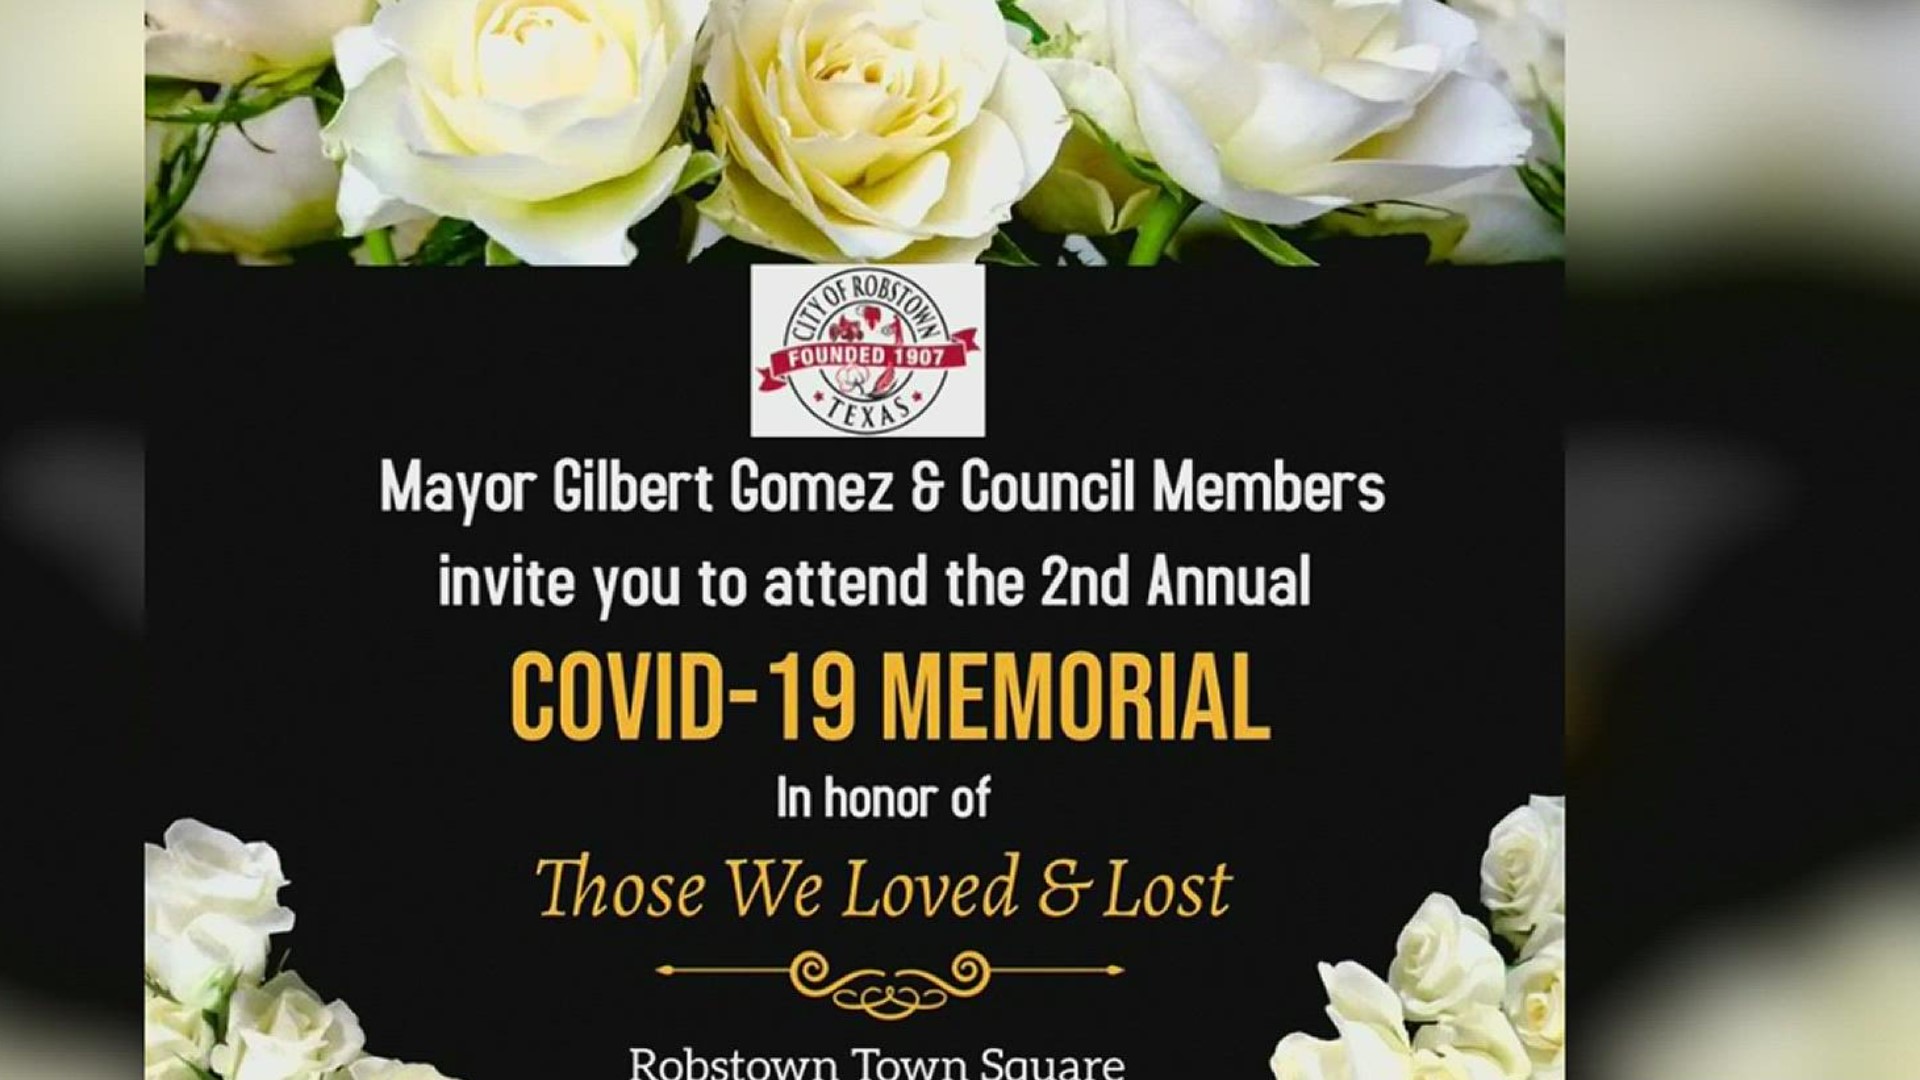 The memorial will be held on March. 30. The event is meant to pay respects to those that lost their life to COVID-19.